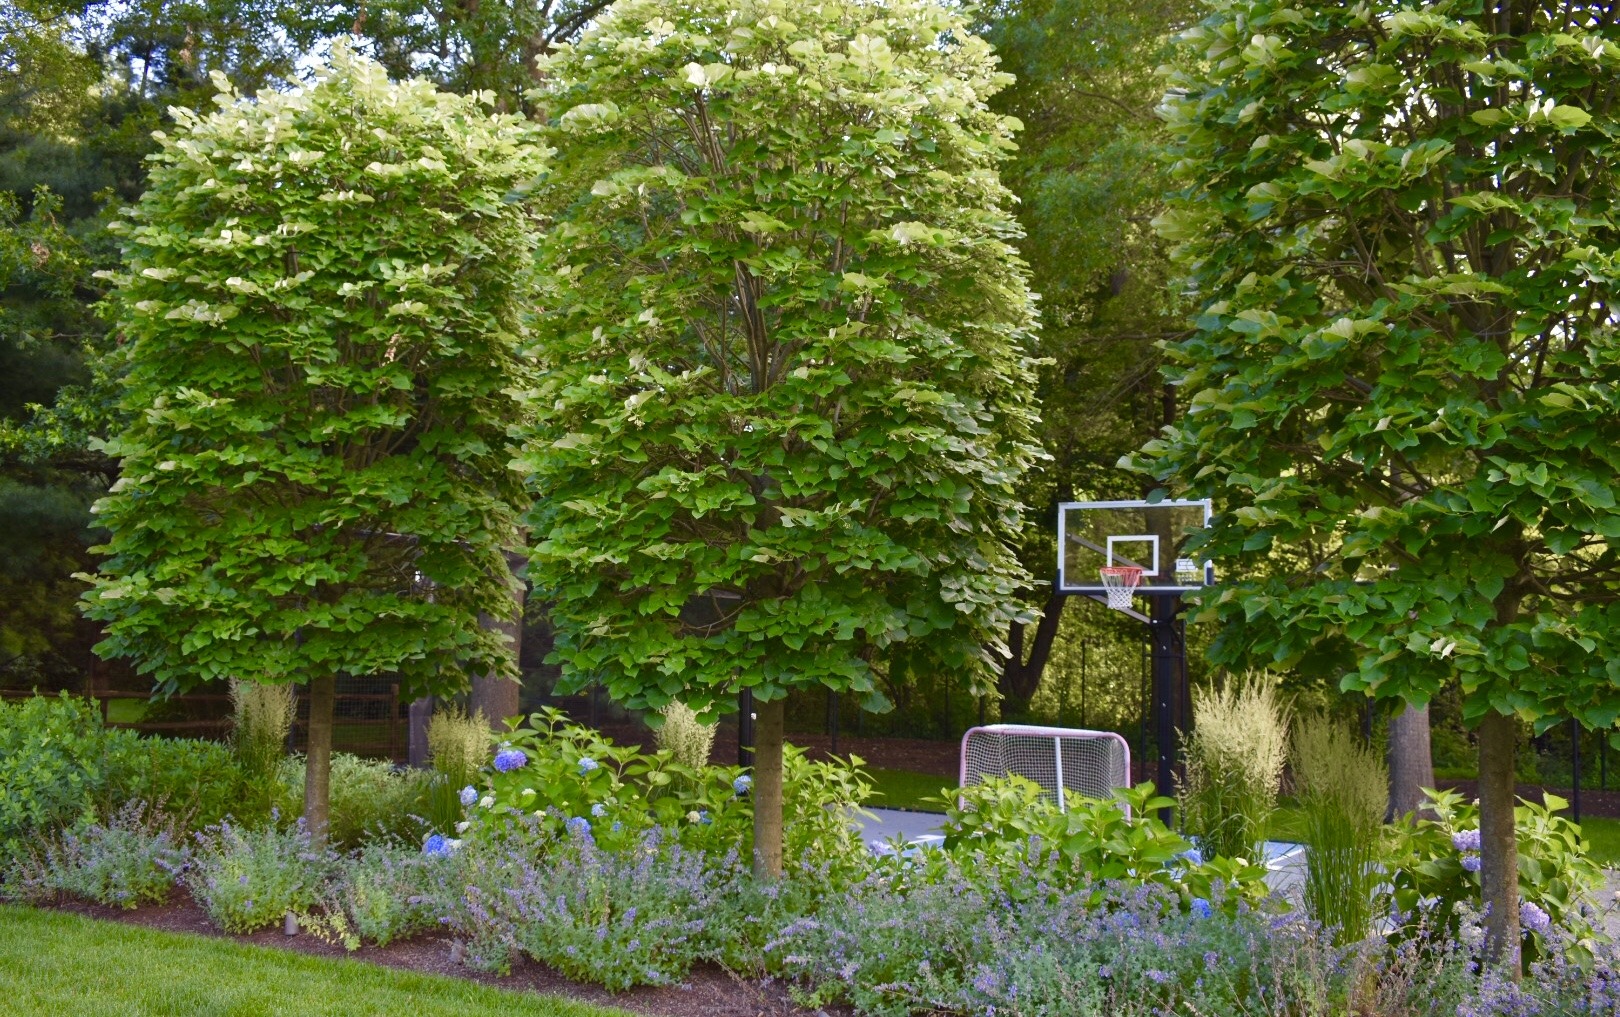 A serene garden with full, green trees, lush bushes, and a basketball hoop standing in the background, suggesting a recreational outdoor space.